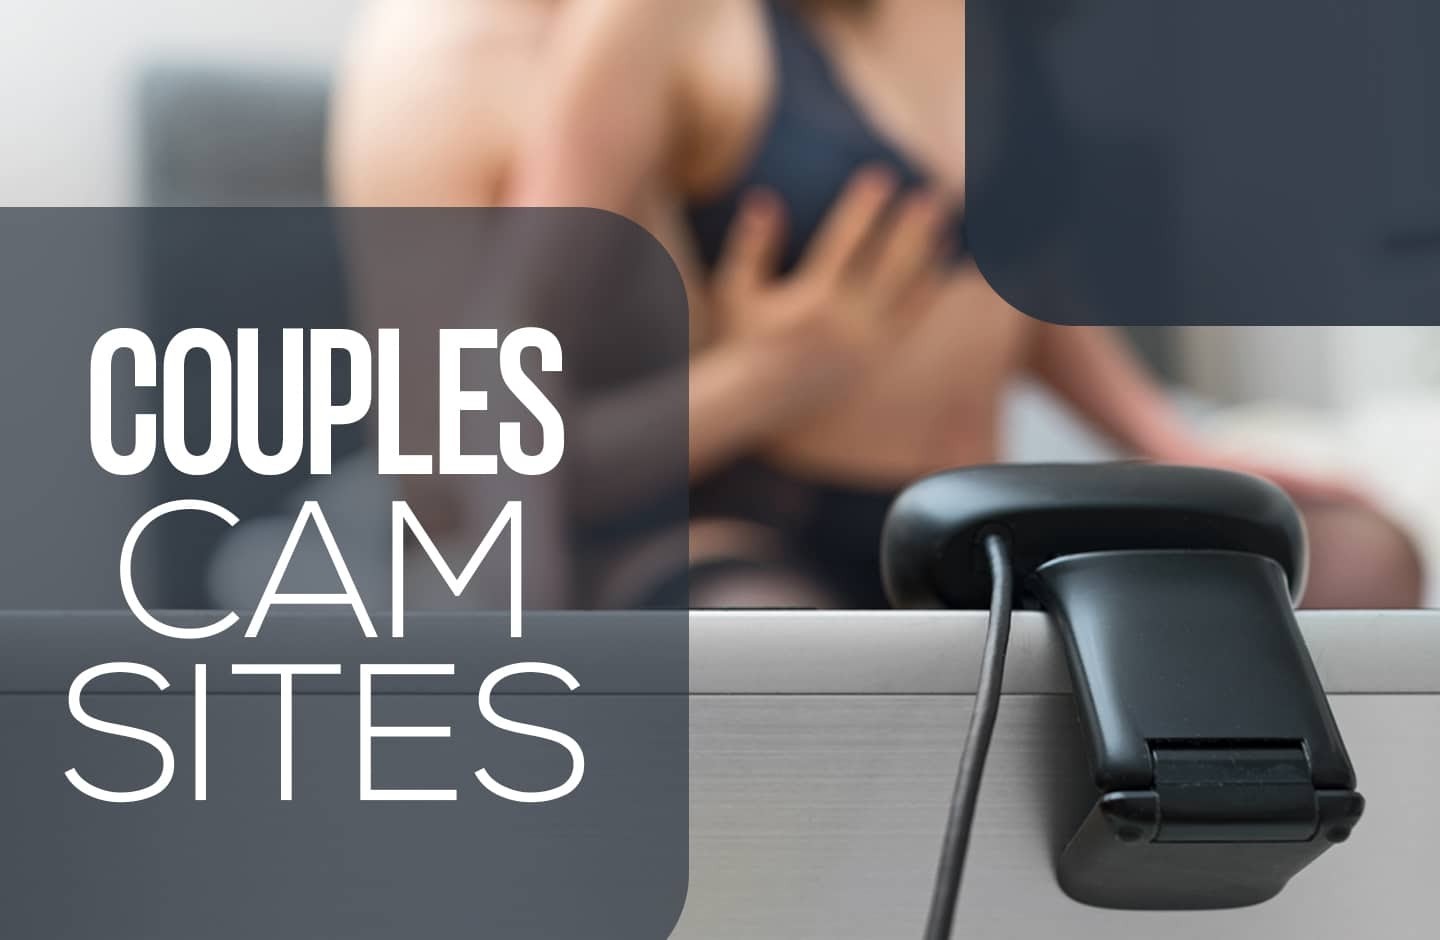 Top 6 Couples Cam Sites Reviewed picture